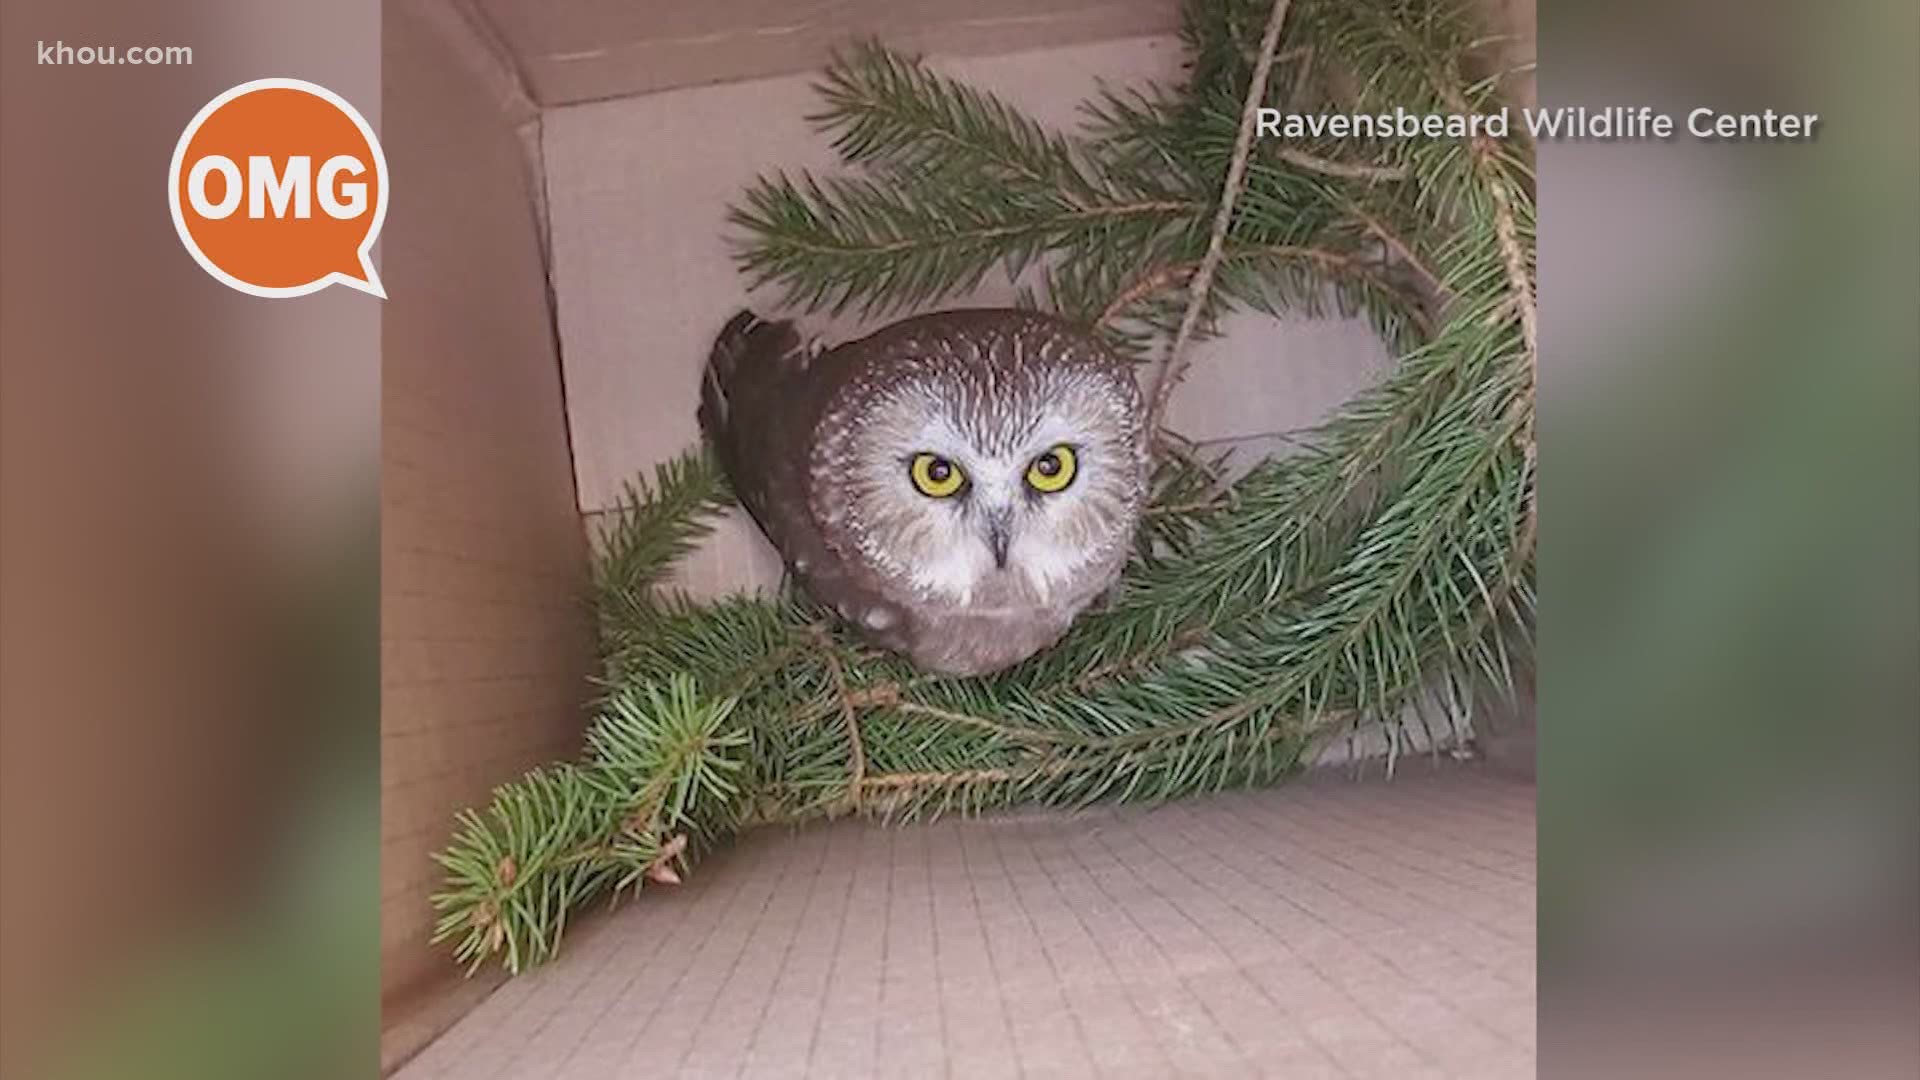 A baby owl was rescued from the Rockefeller Christmas tree. It survived the entire ride during transport without food and water.